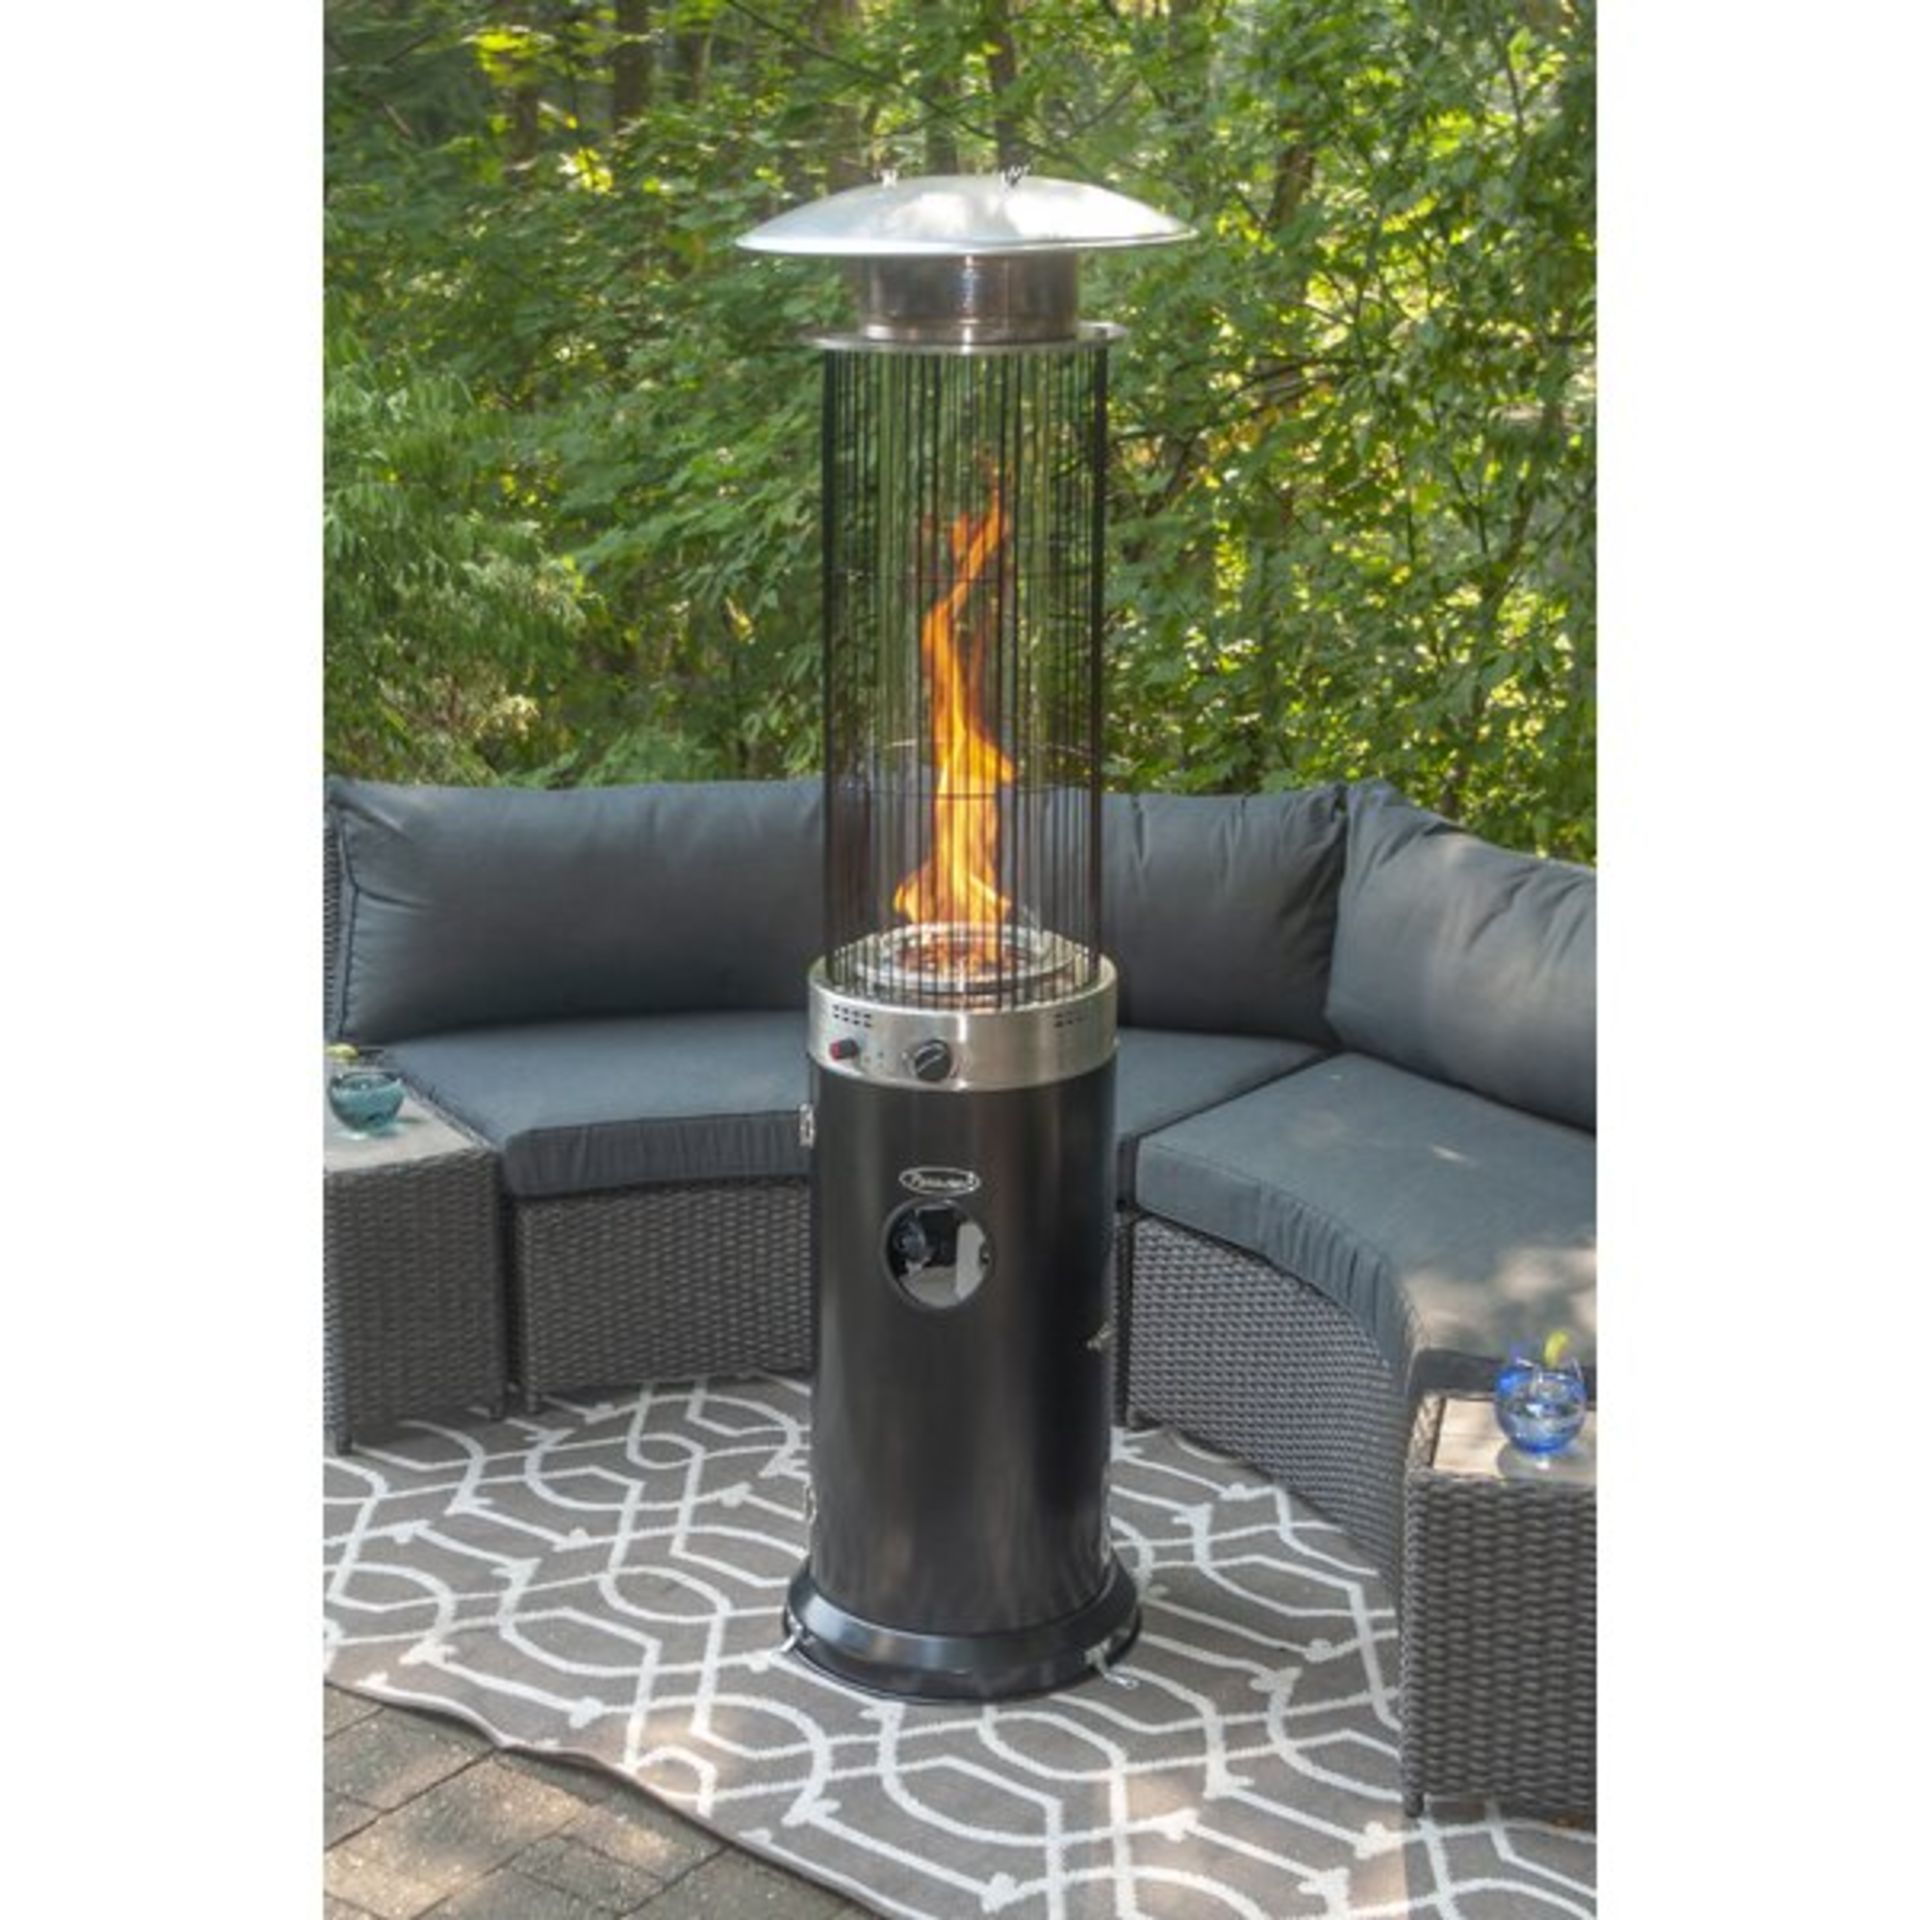 + VAT Brand New Chelsea Garden Company Wheeled Garden Gas Patio Heater With Cover - 2.11m Tall -